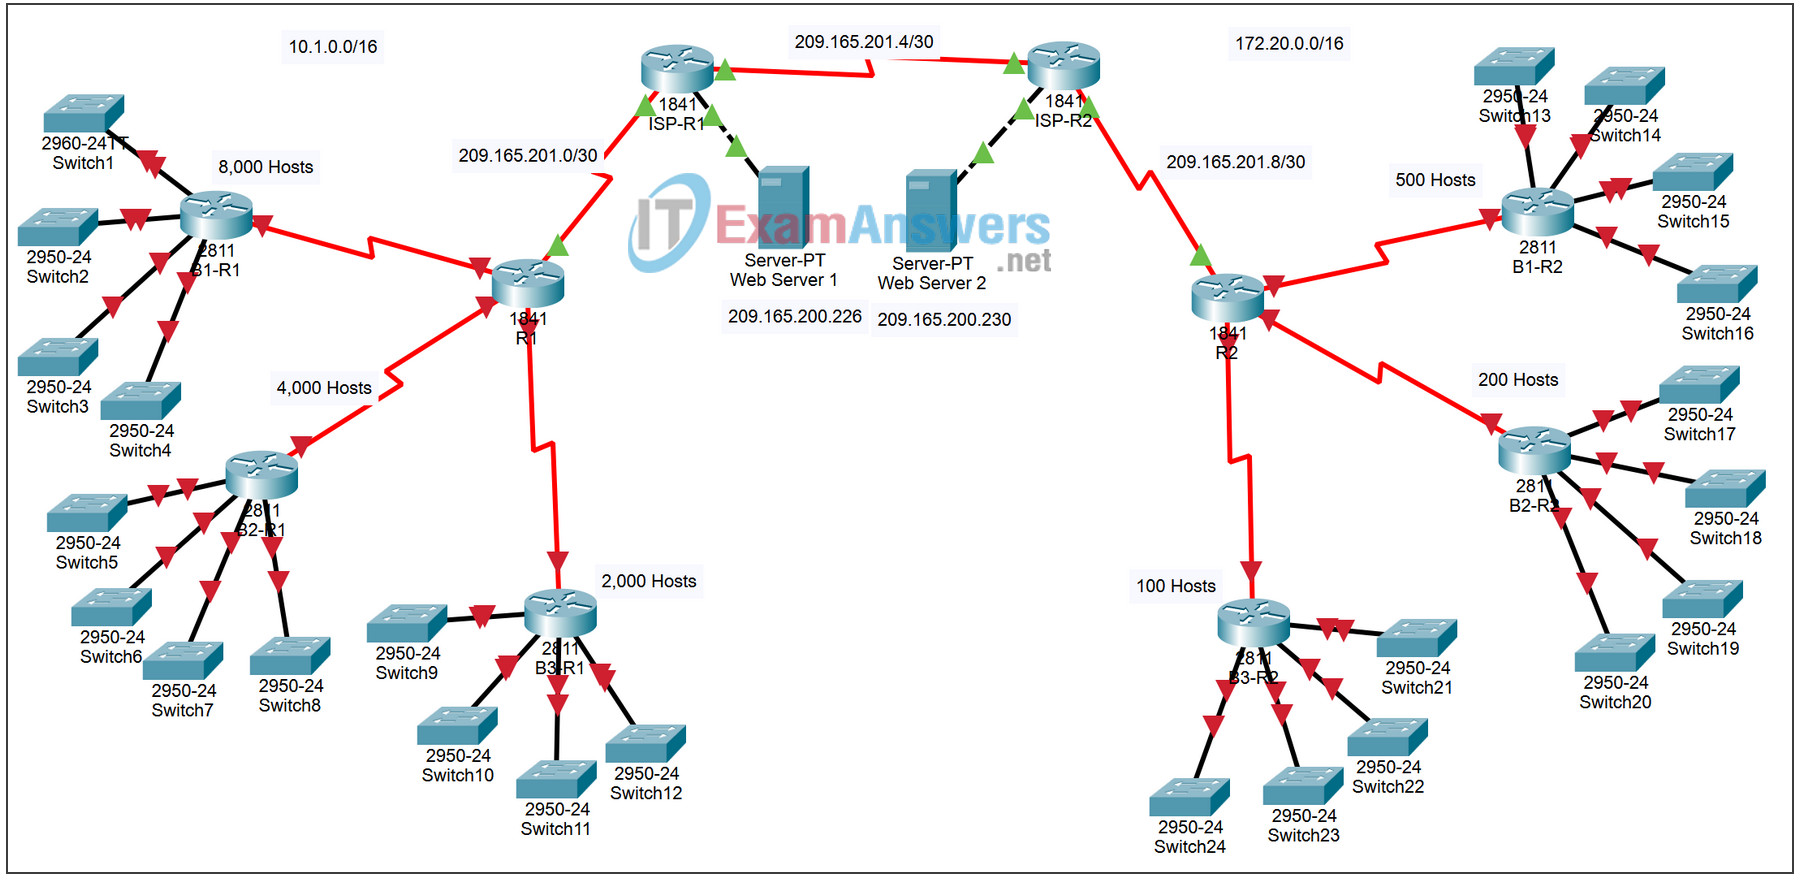 10.3.1 Packet Tracer - Skills Integration Challenge Answers 2